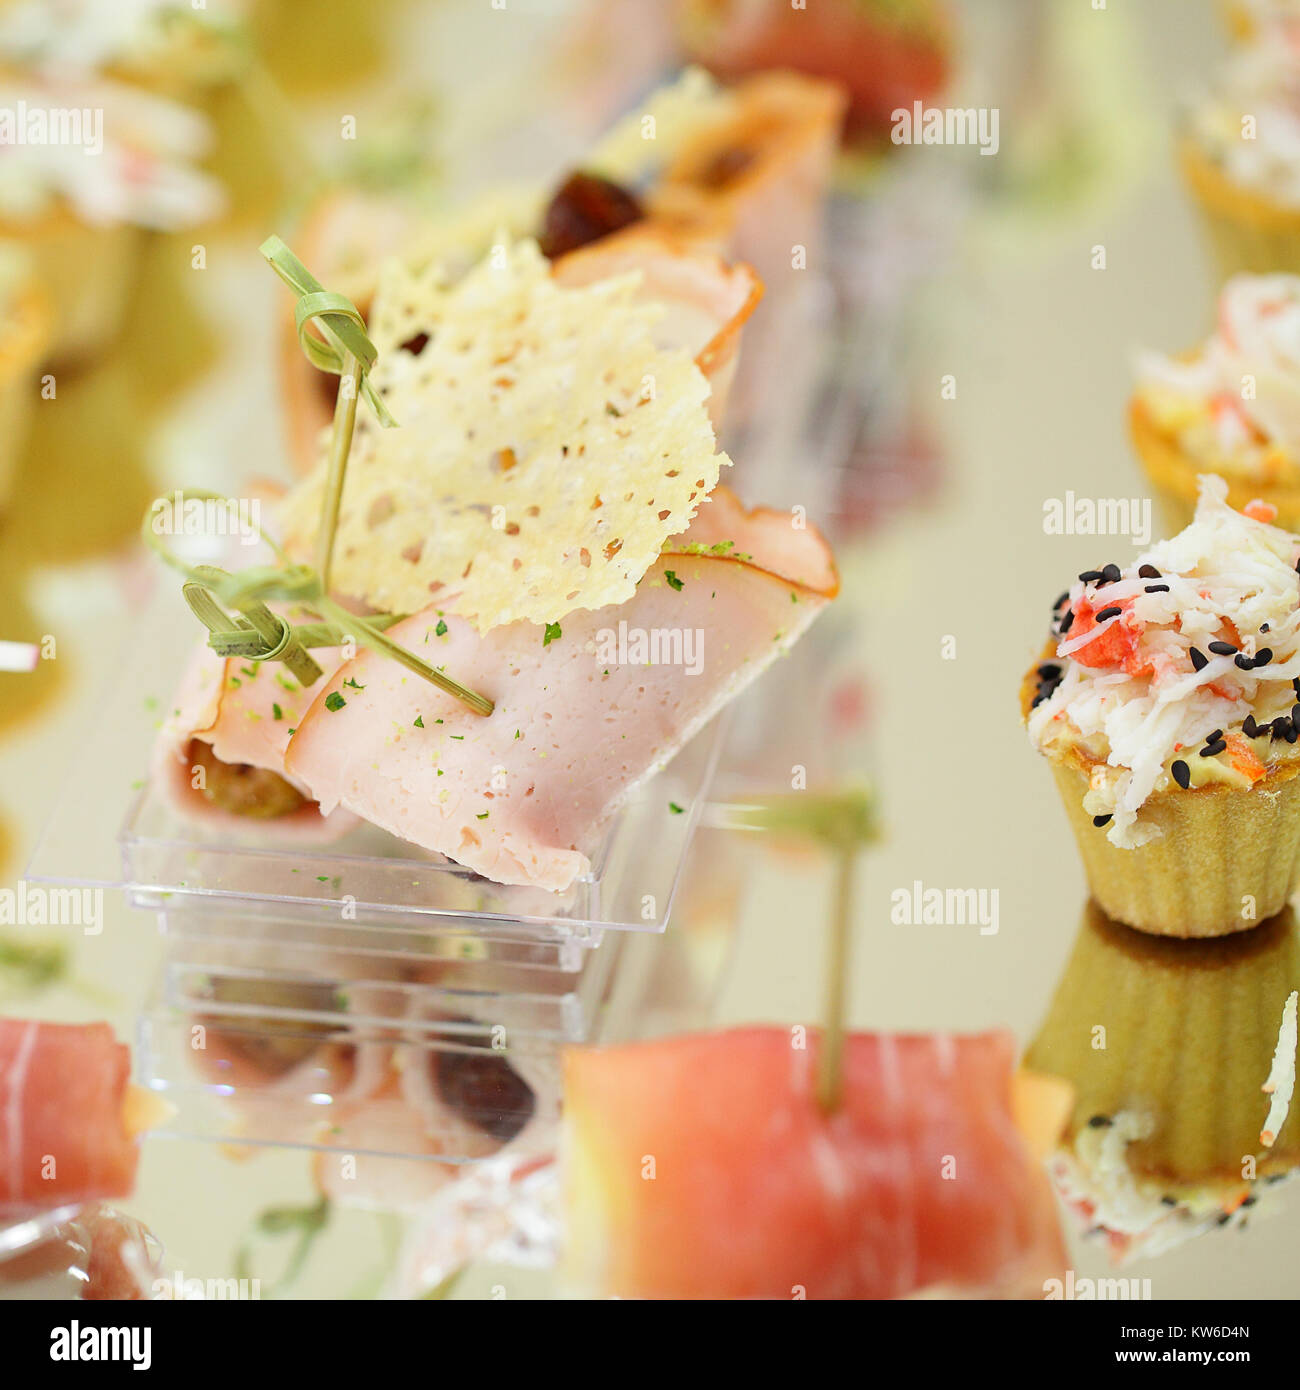 Appetizers, gourmet food, catering service Stock Photo